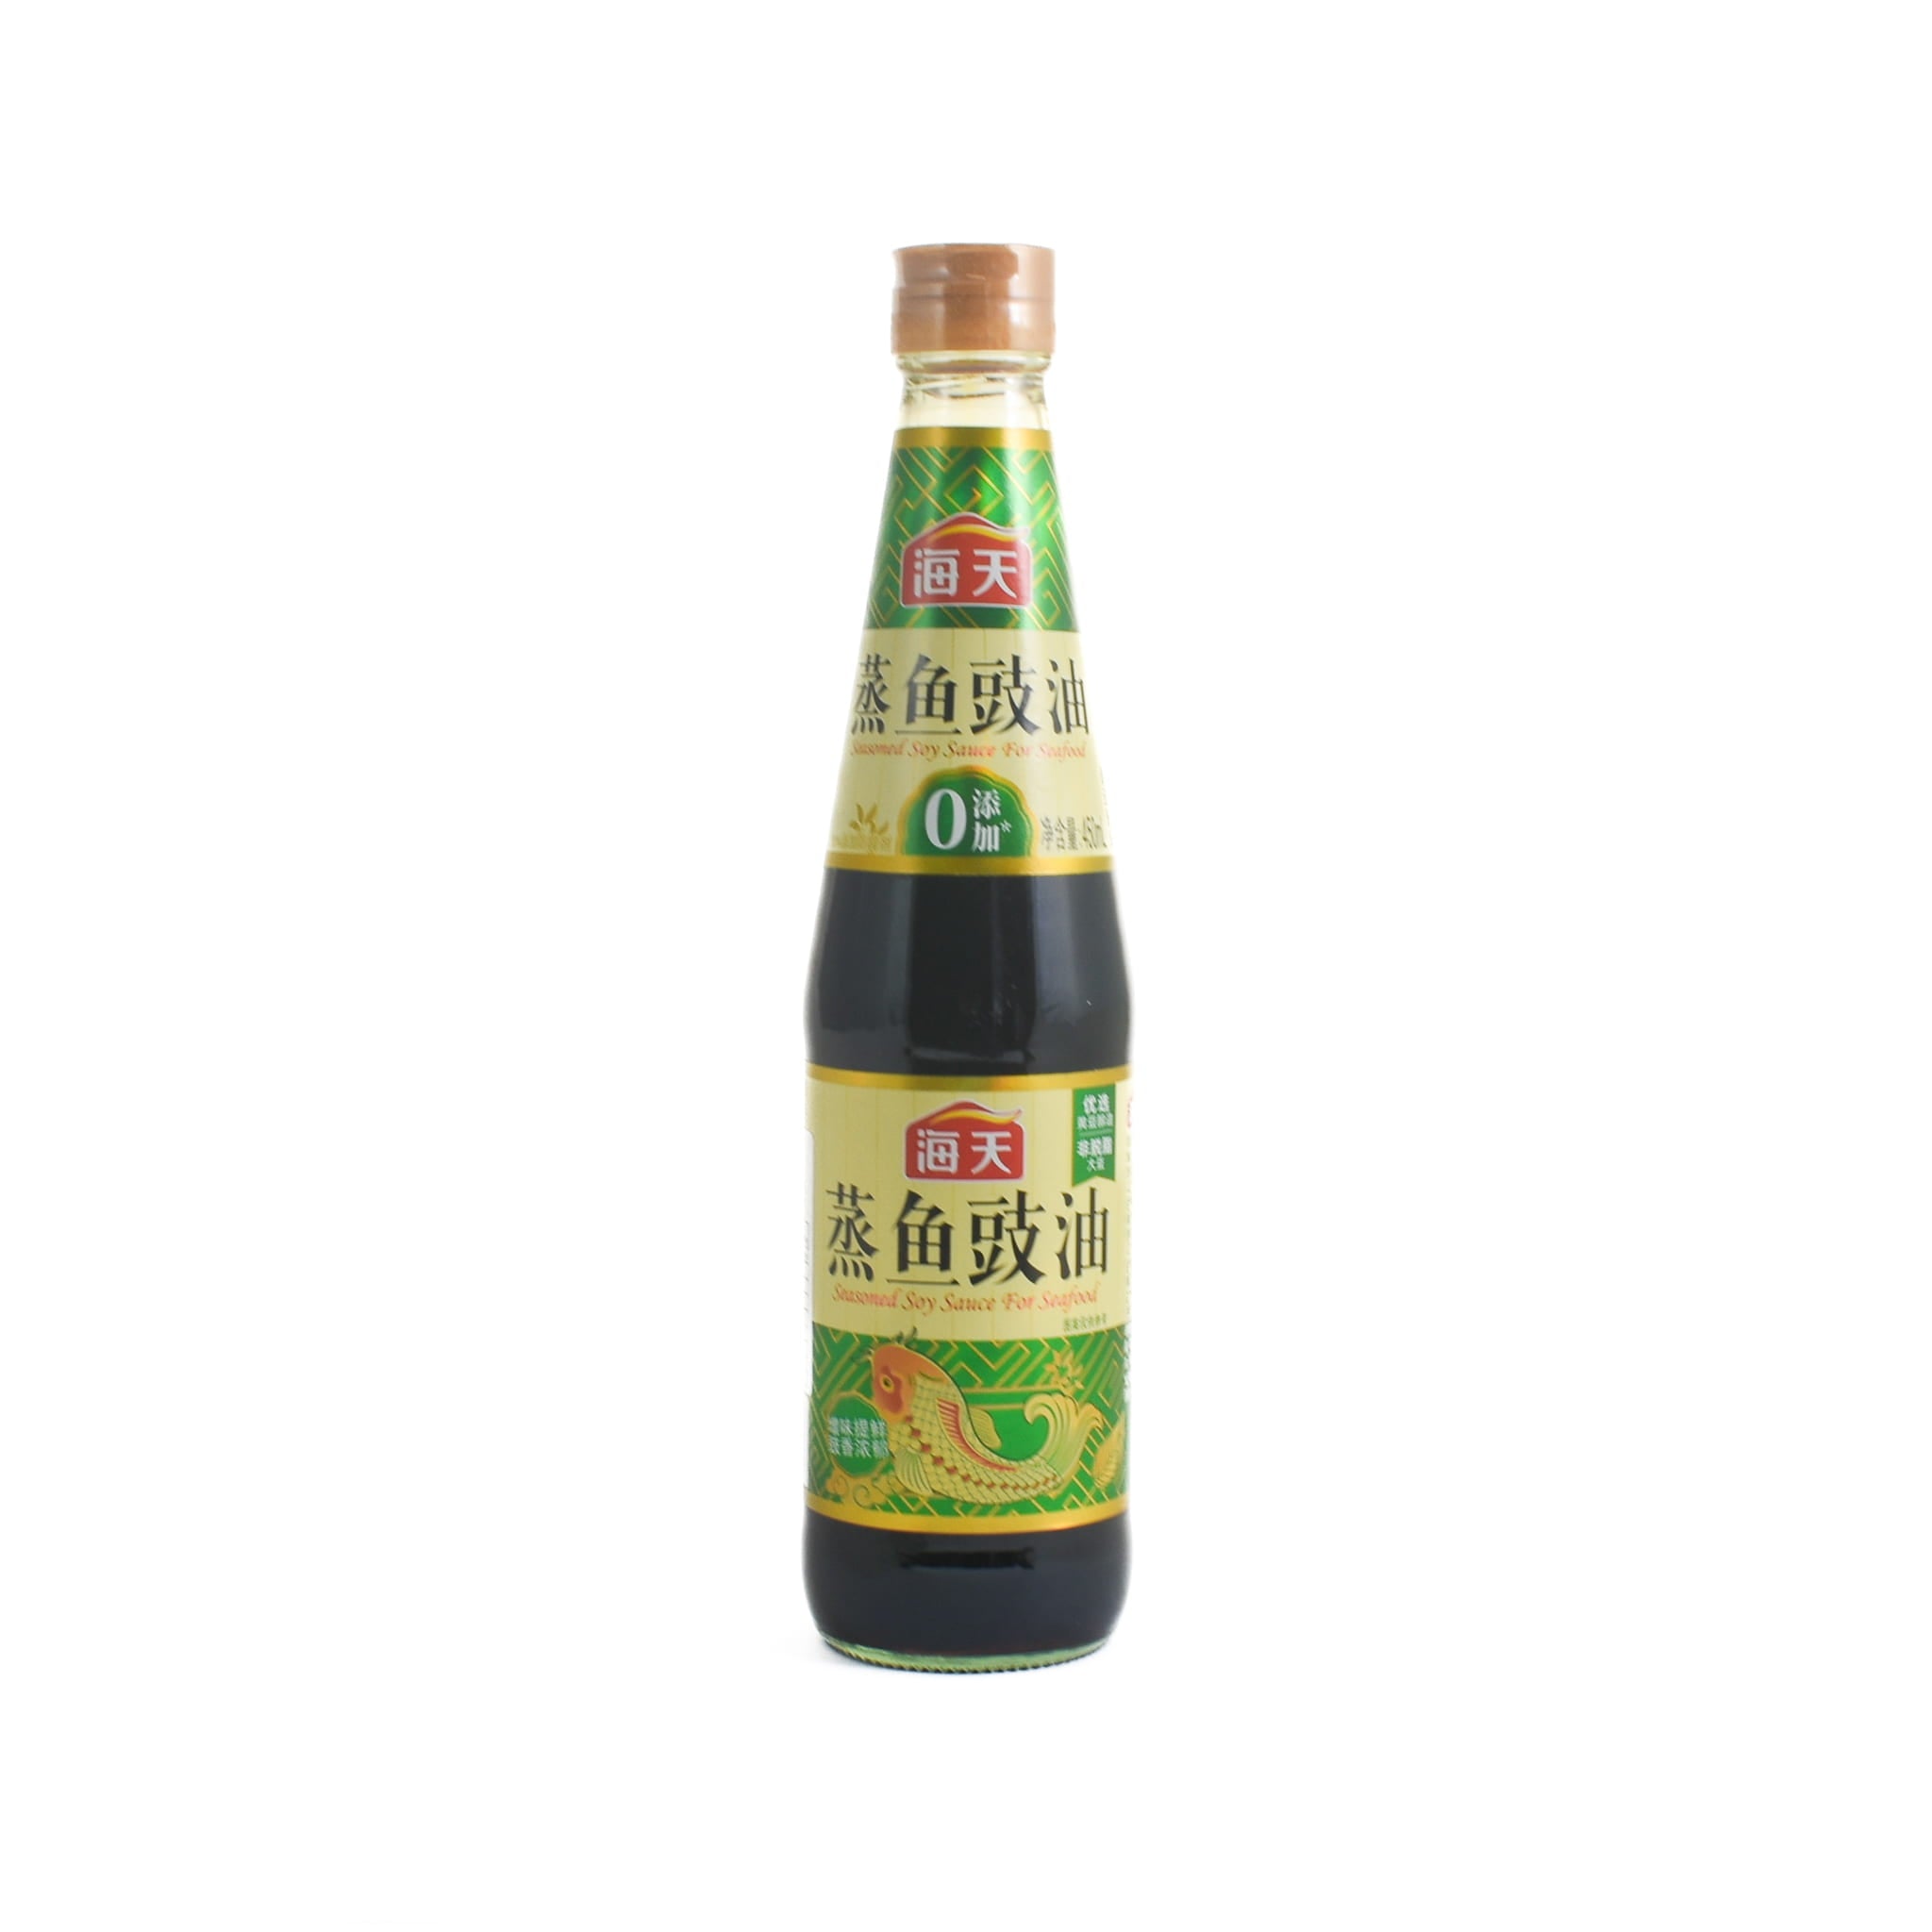 Haday Soy Sauce for Steamed Fish, 450ml